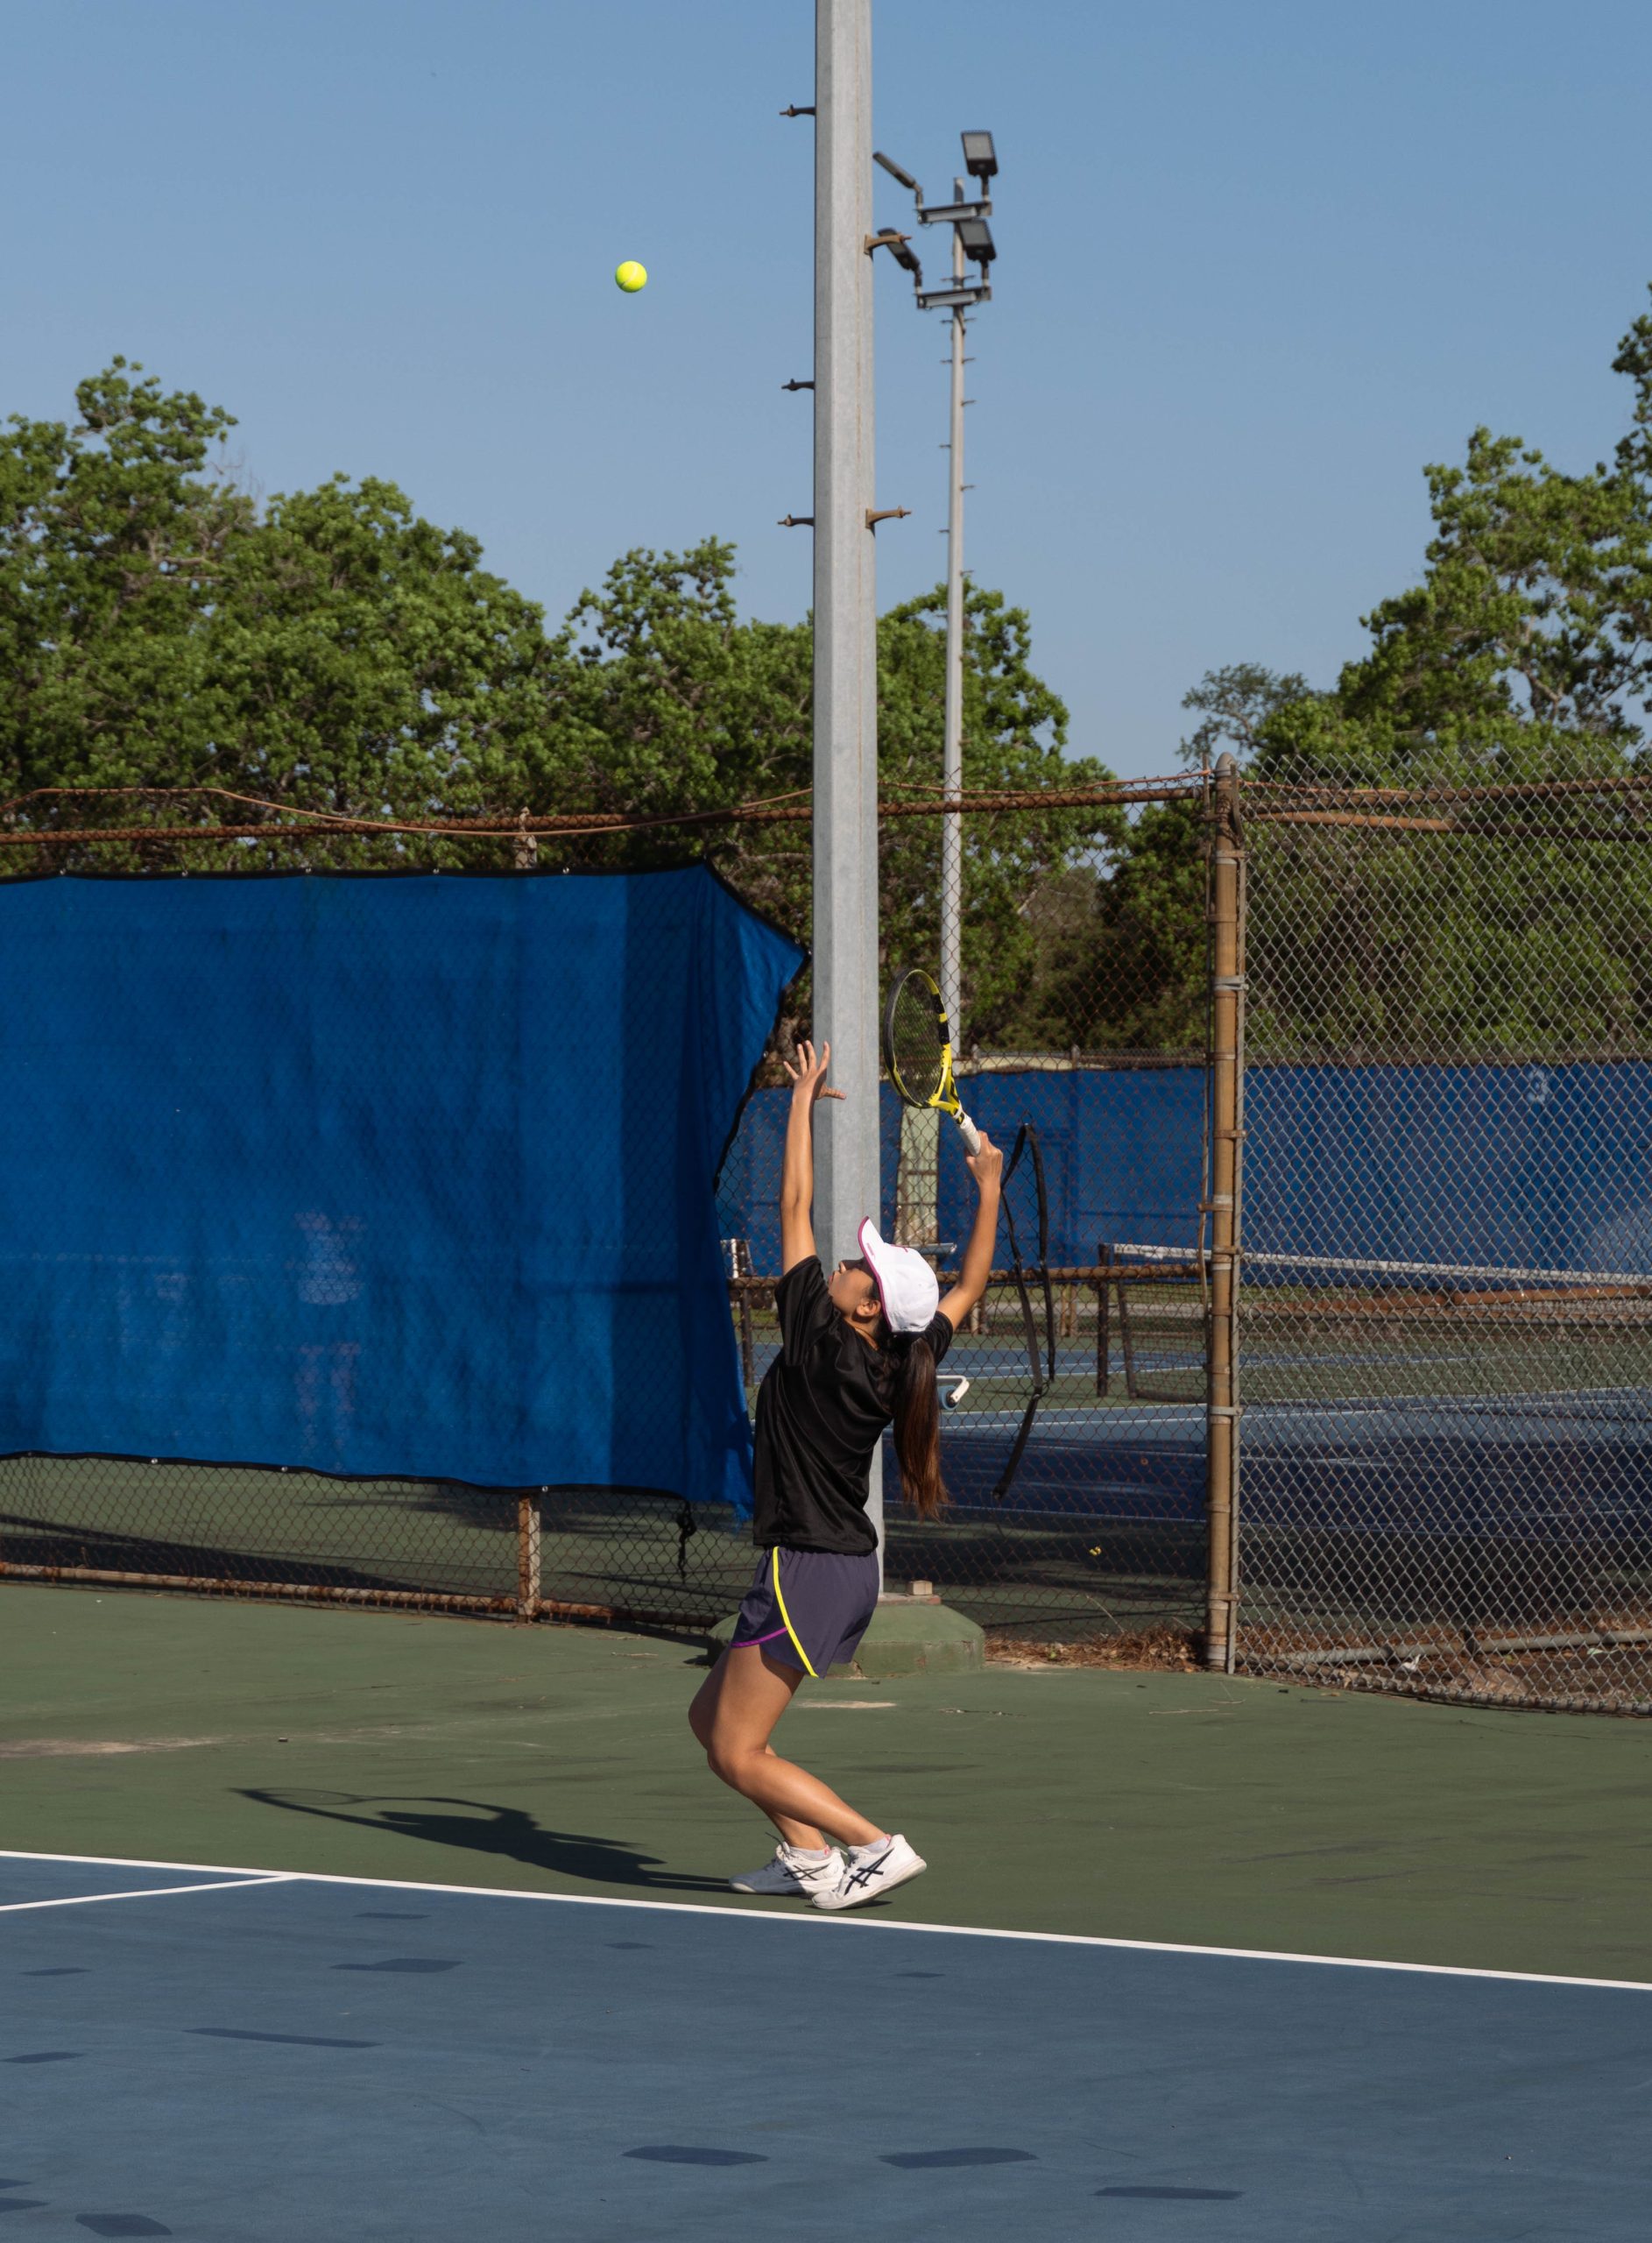 Junior Ellen Dai serves cross-court to her opponent during the opening match point. She played girls doubles alongside junior Shyla Jogi. The pair won second place in the girls doubles tournament.